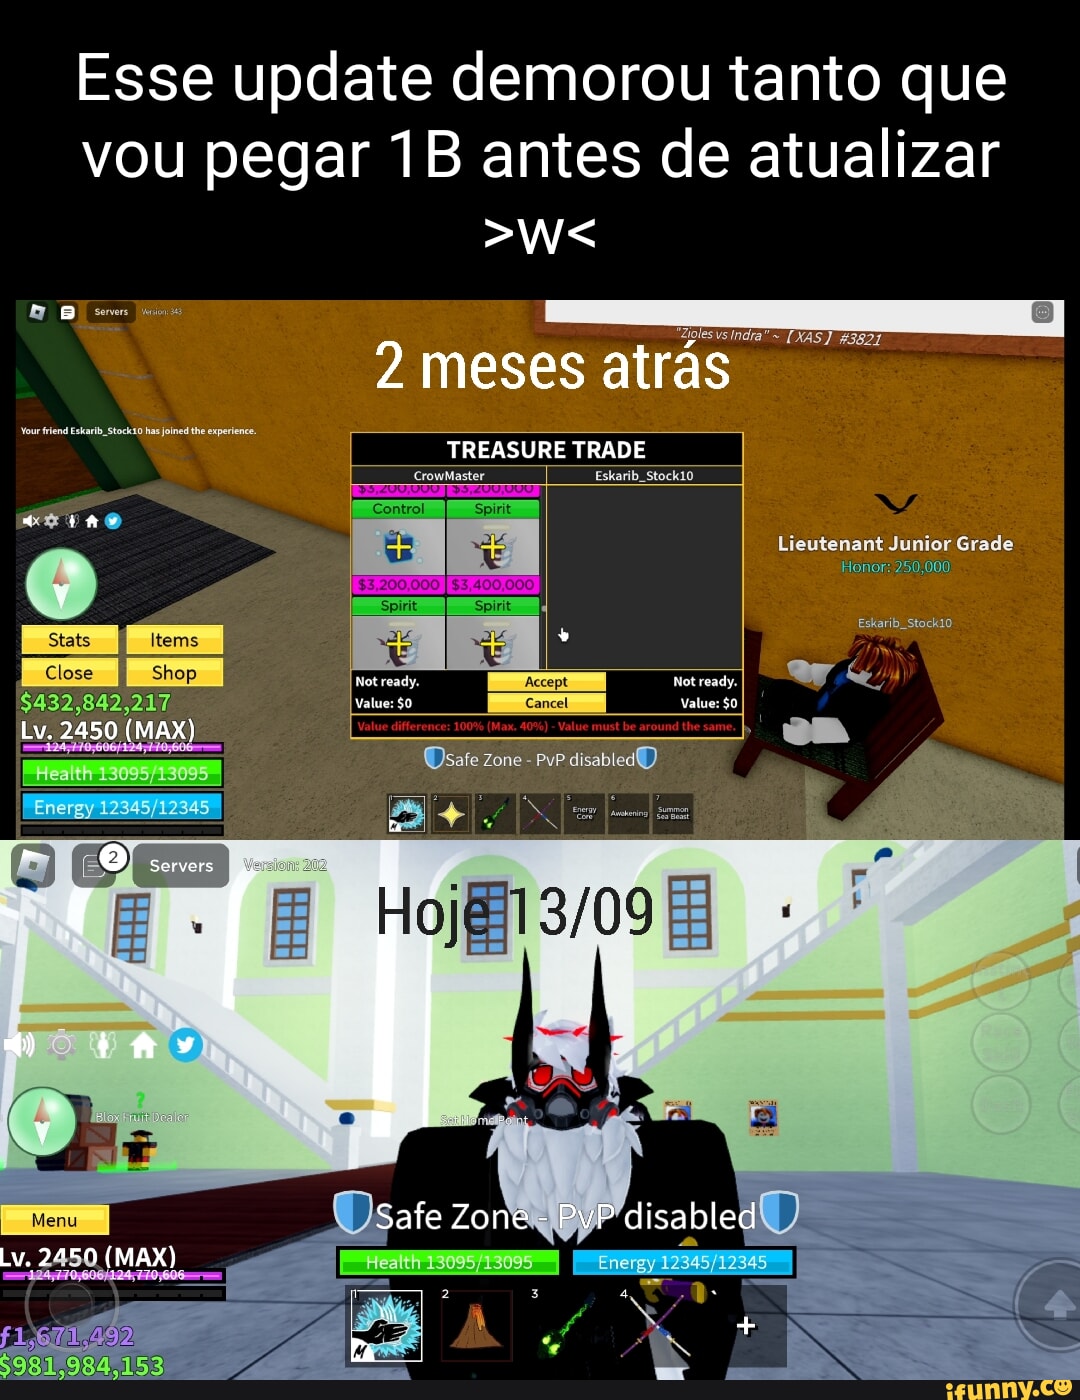 Bloxfruits memes. Best Collection of funny Bloxfruits pictures on iFunny  Brazil